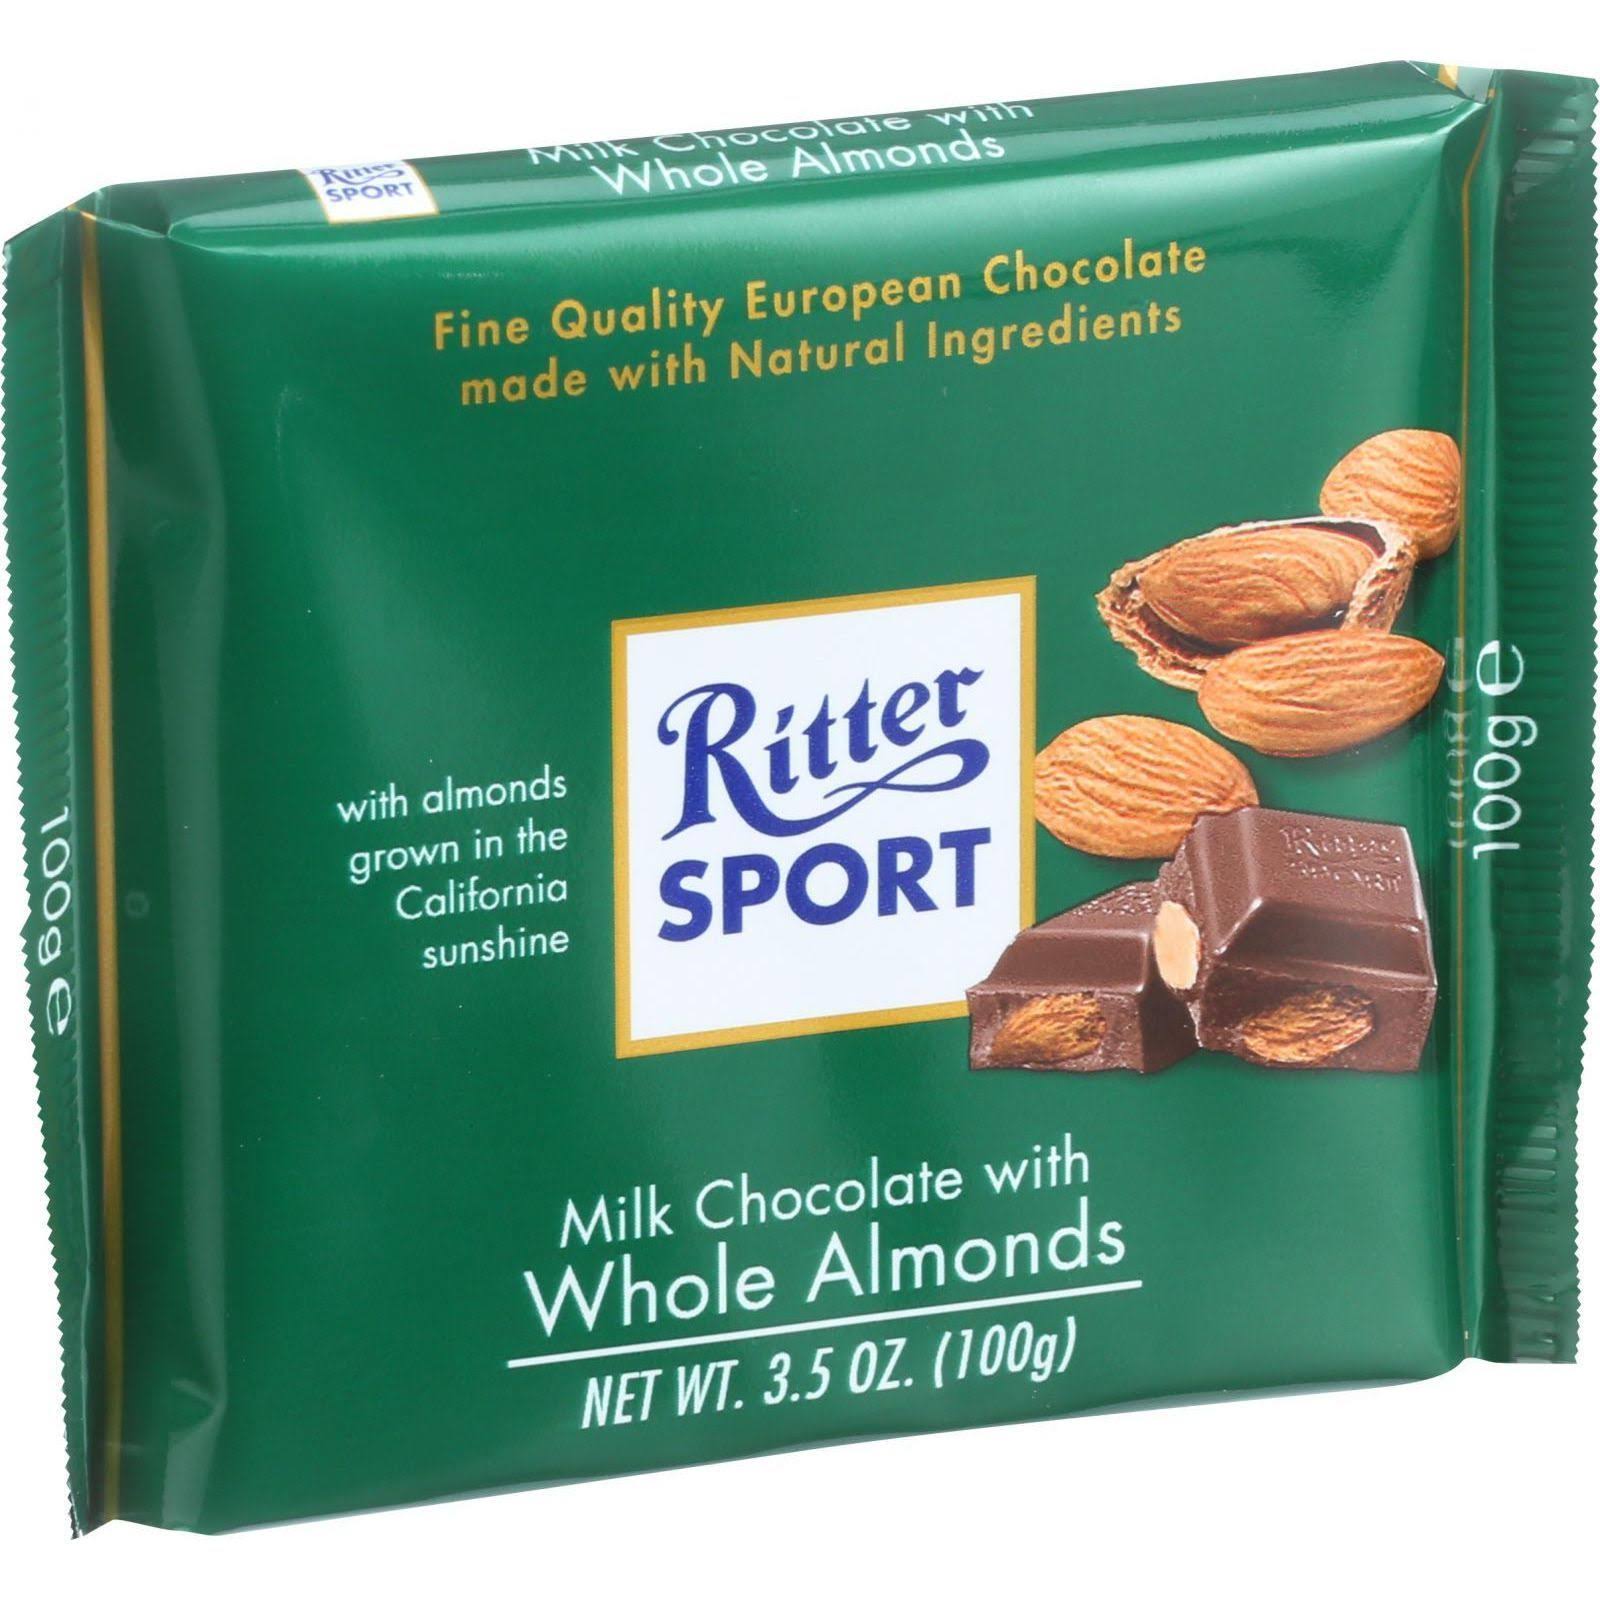 Ritter Sport Milk Chocolate With Whole Almonds - 100g